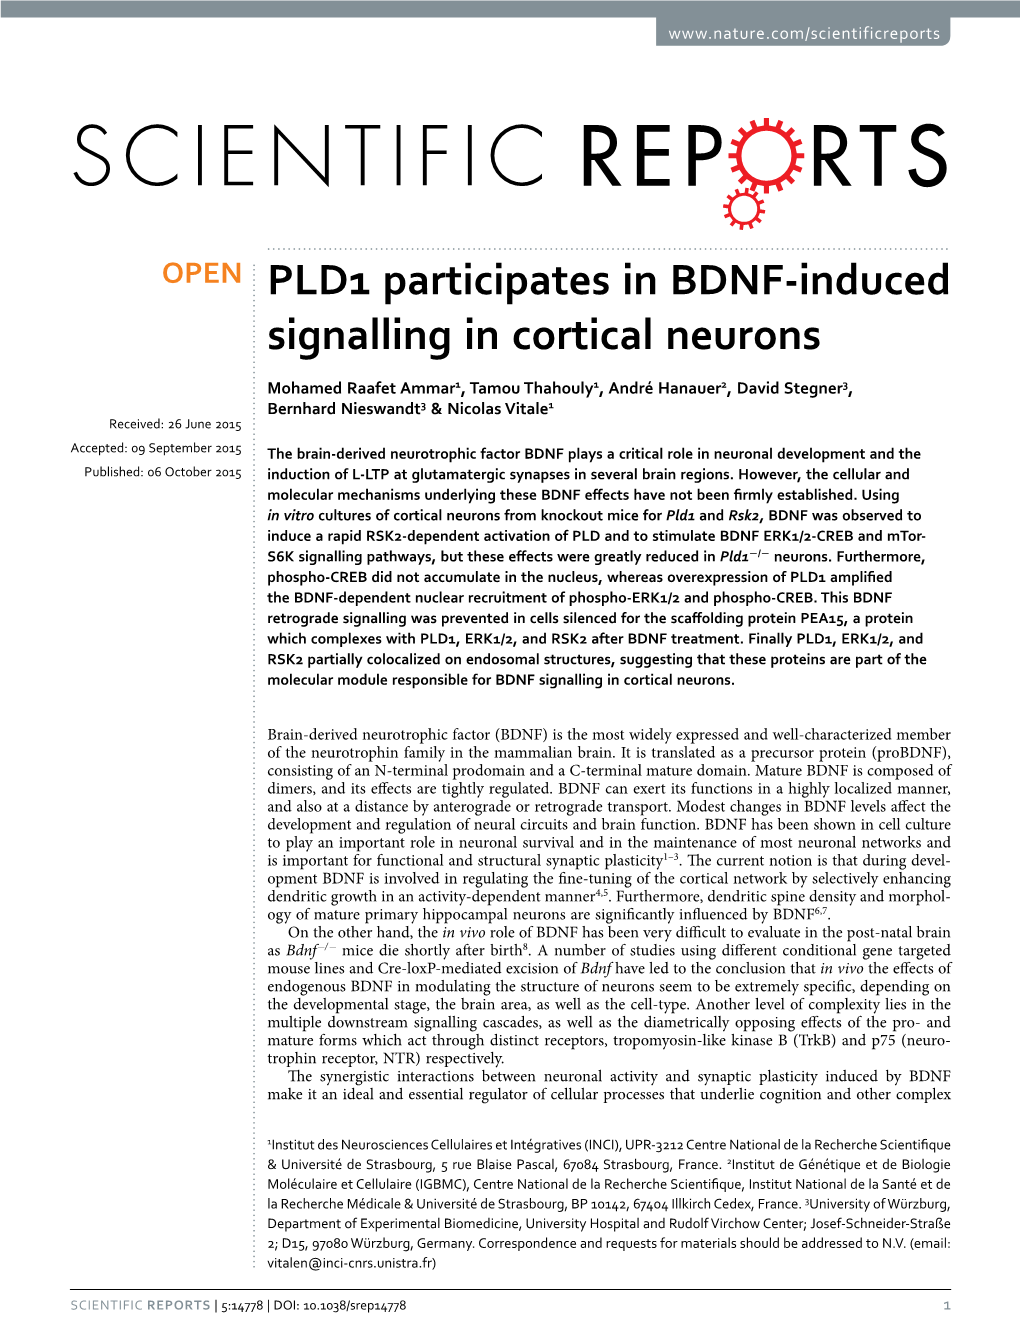 PLD1 Participates in BDNF-Induced Signalling in Cortical Neurons